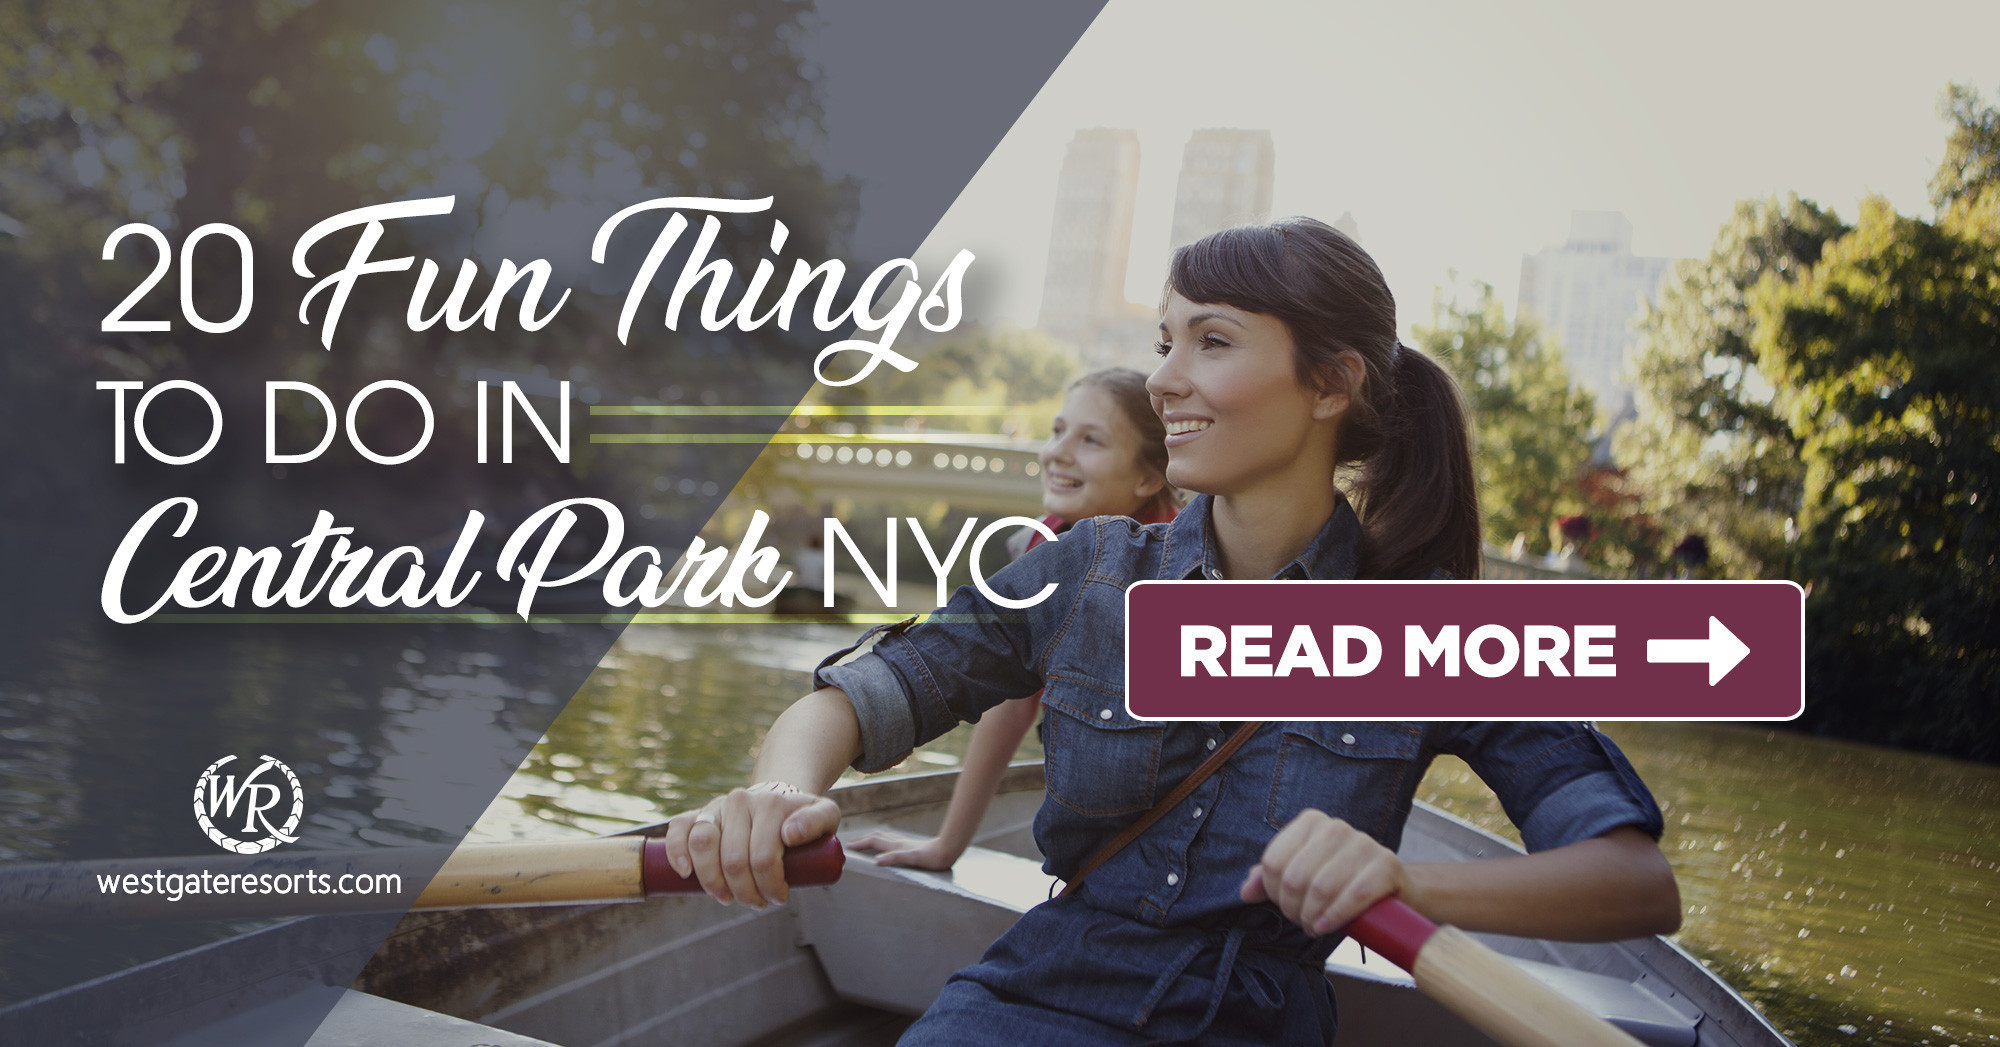 20 Fun Things to do in Central Park NYC